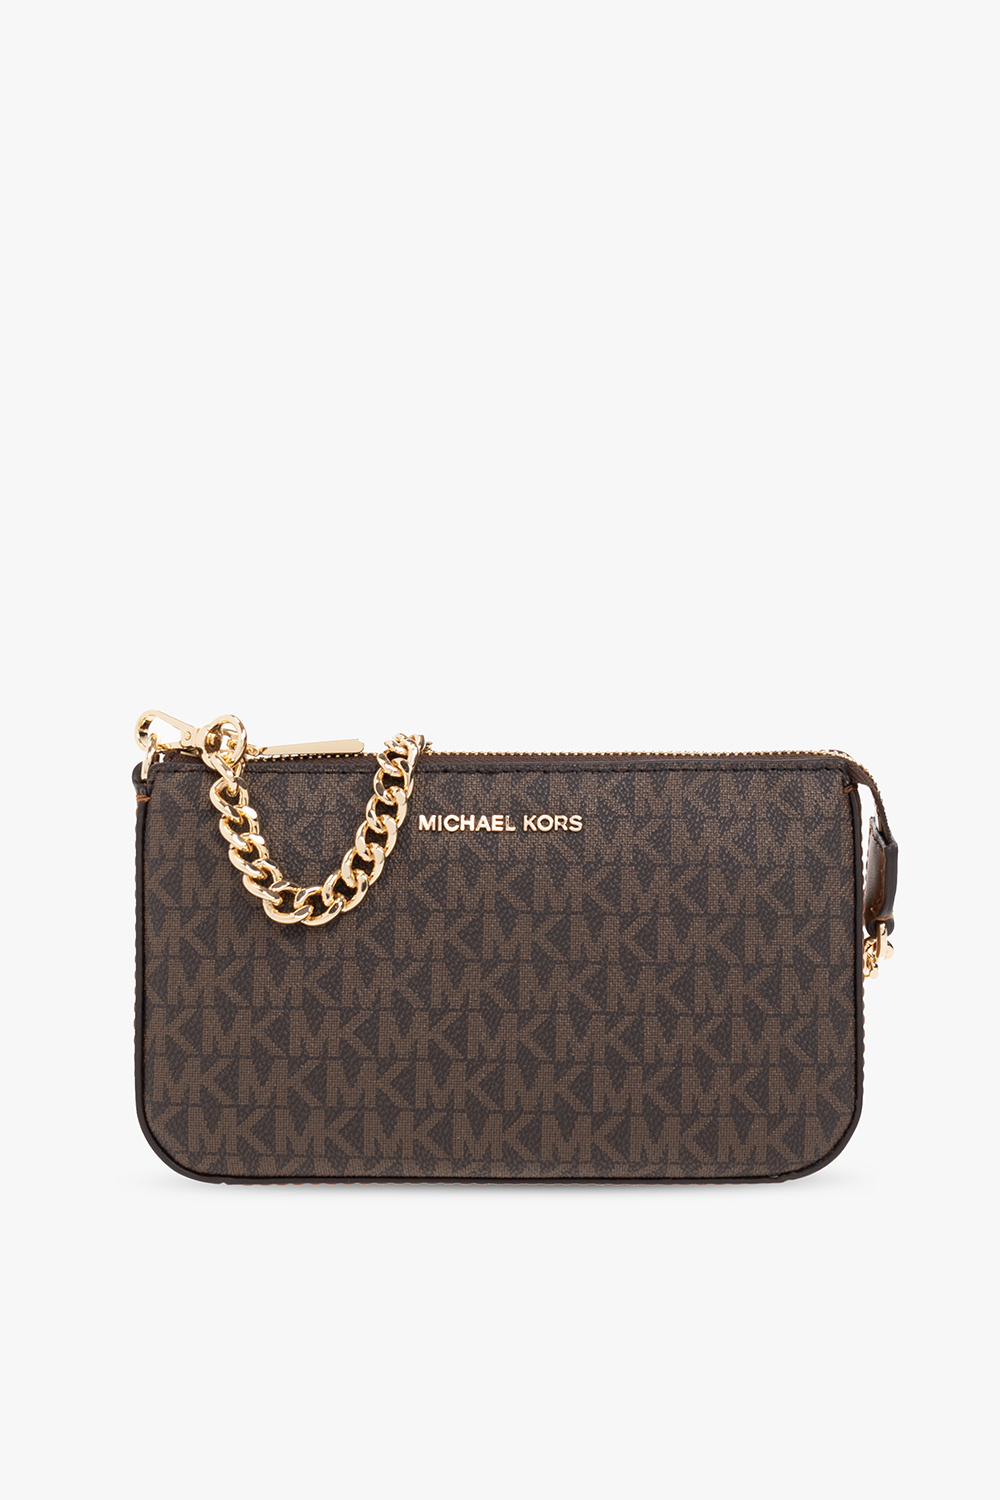 Buy Louis Vuitton Gift Cards - Discounts up to 1%